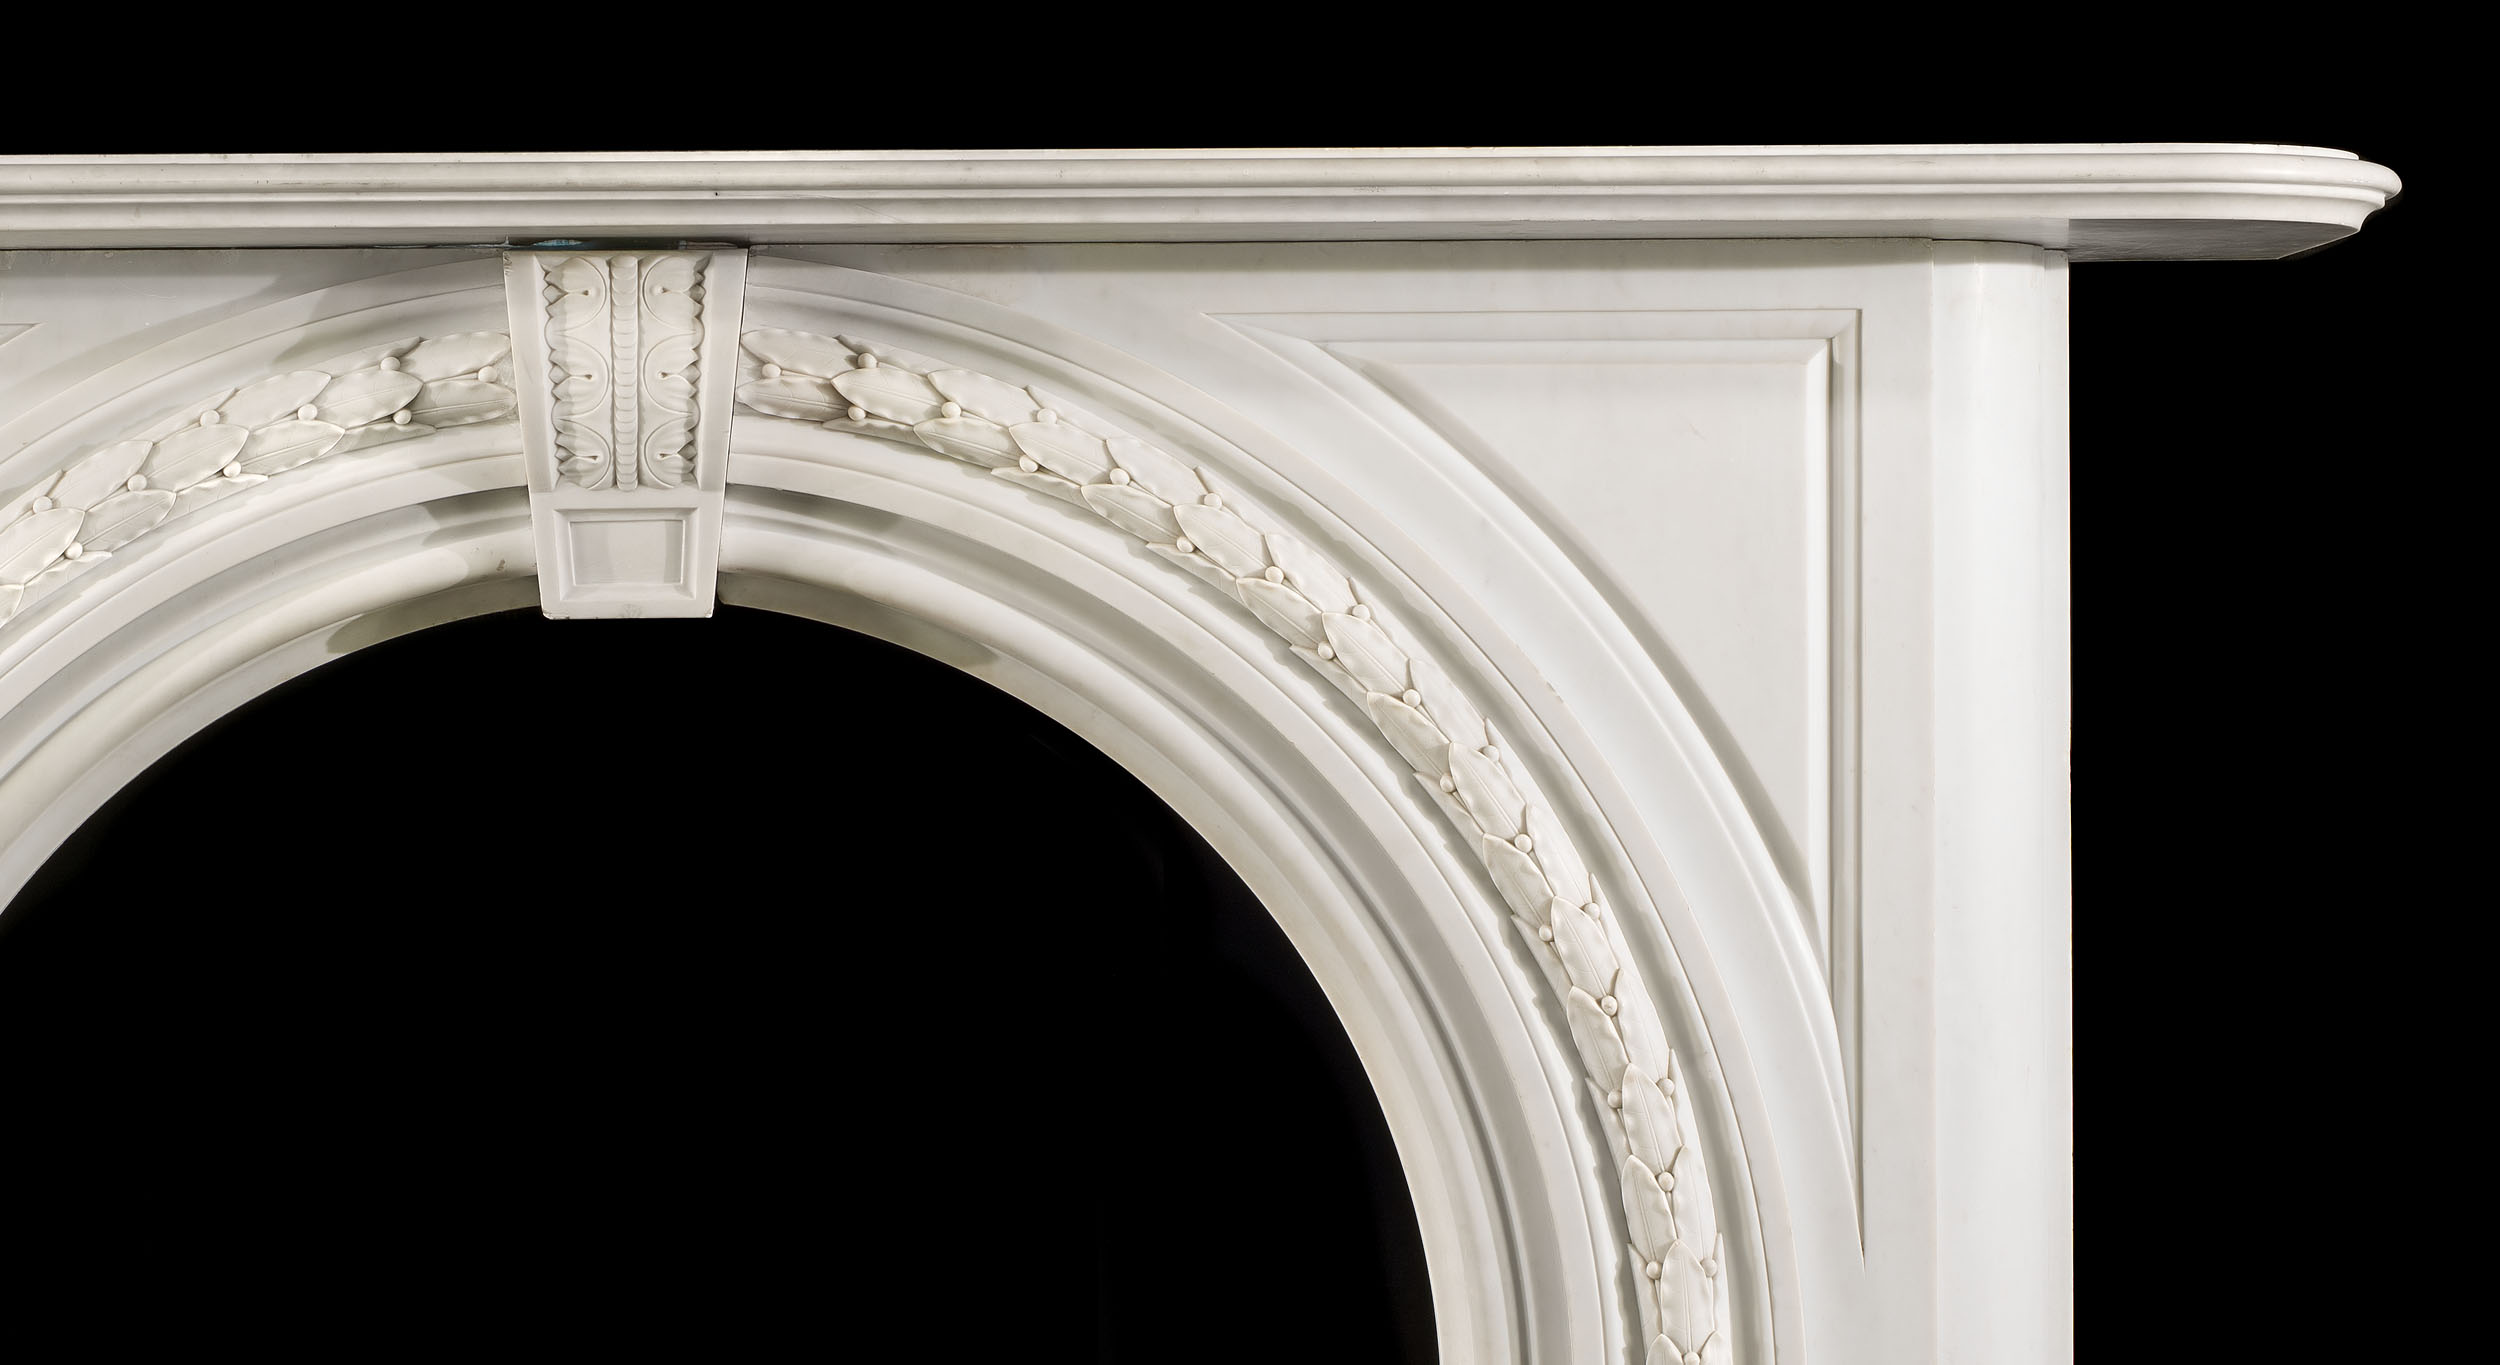  A Large Victorian Arched Marble Fireplace